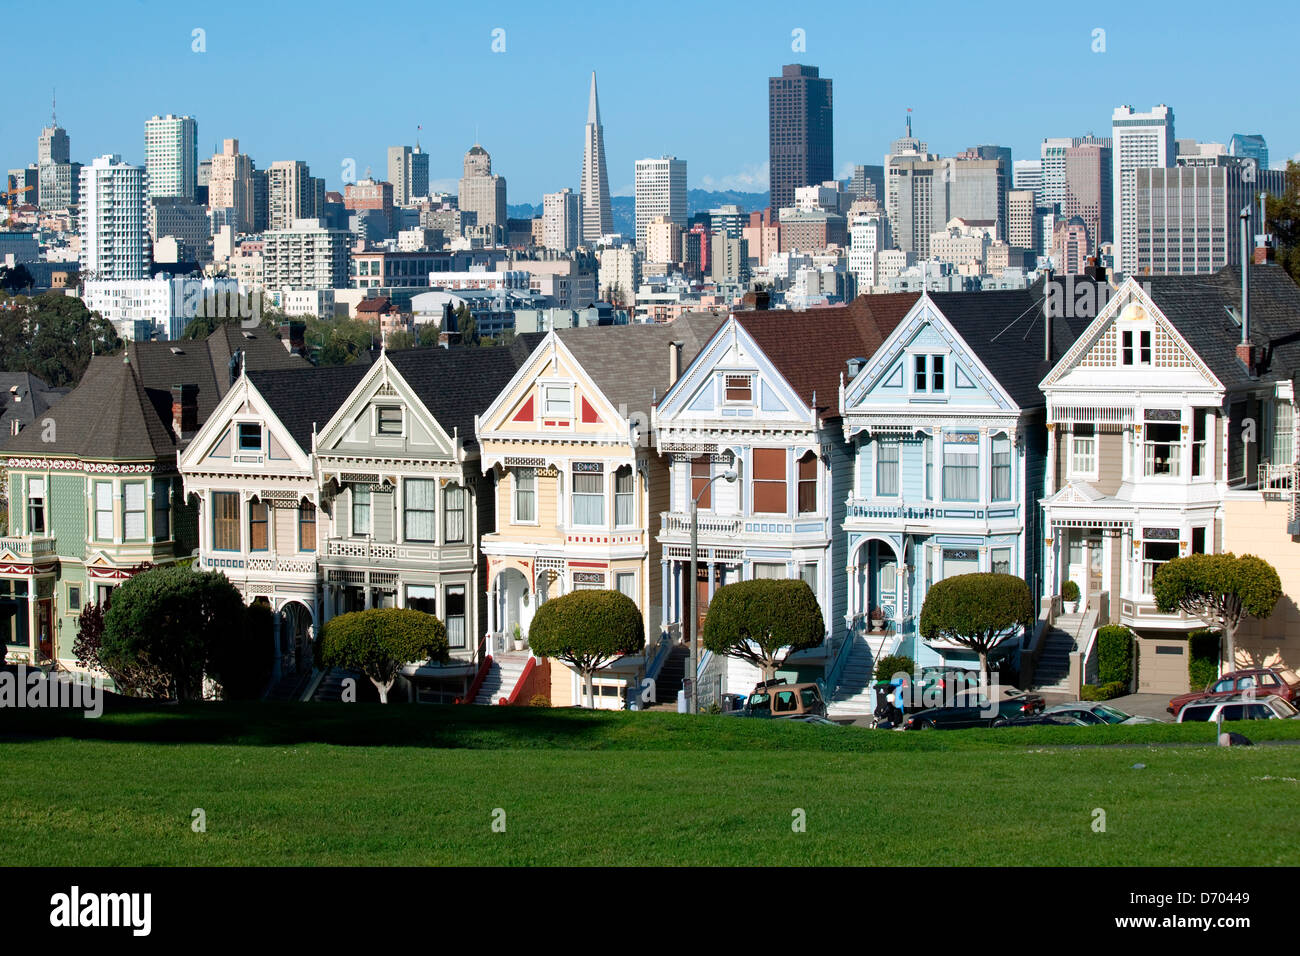 Historic Victorian Houses aka Painted Ladies or Seven Sisters of Alamo Square in Francisco, CA Stock Photo